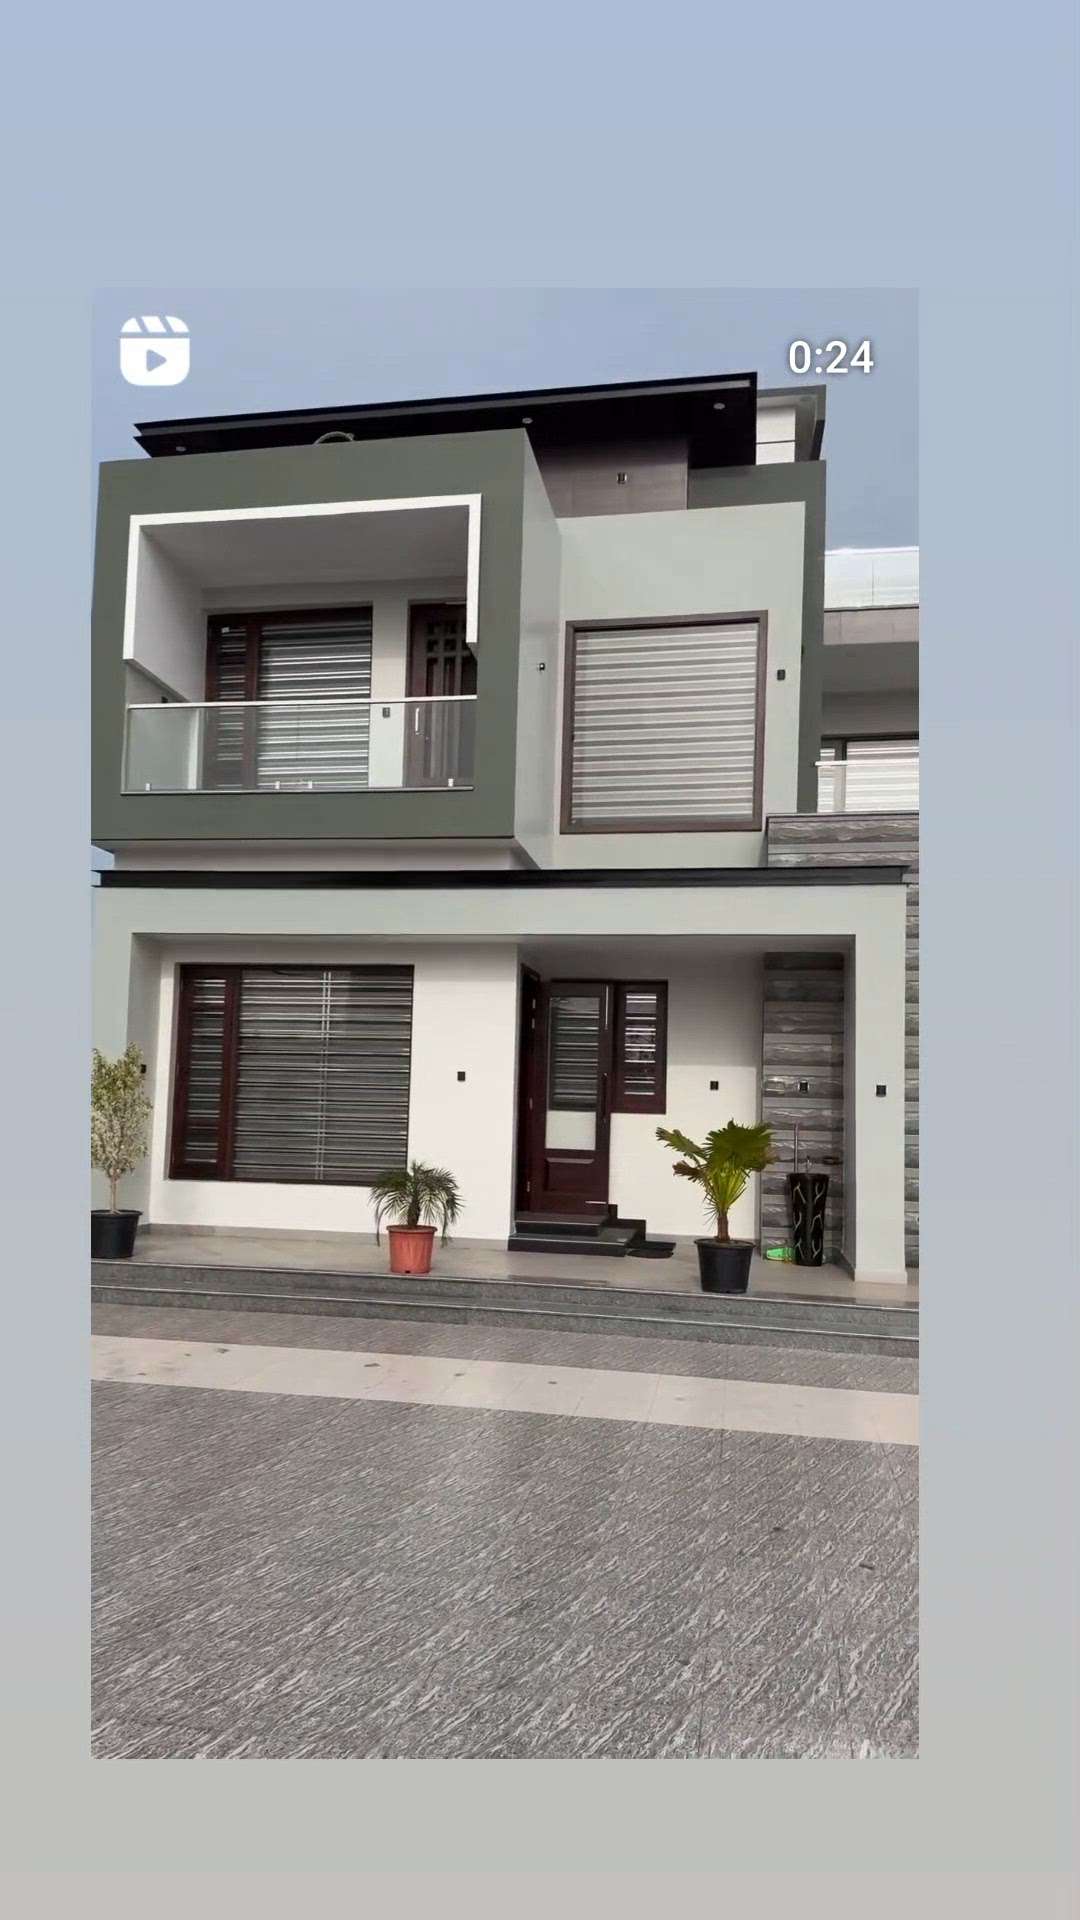 Call Now For House Designing 🏡 

#elevations #elevationdesign #elevation #architecture #frontelevation #autocad #civil #exteriordesign #civilengineering #buildingelevation #revit #engineering #civilengineer #architect #vray #design #civilengineers #houseelevation #civilconstruction #elevationdesigns #delevation #modernelevation #architectures #structuralengineer #architecturestudents #emsiddiqui #uniqueshouse #staircases #surrealiste #elevationworship
#newhousedesigning